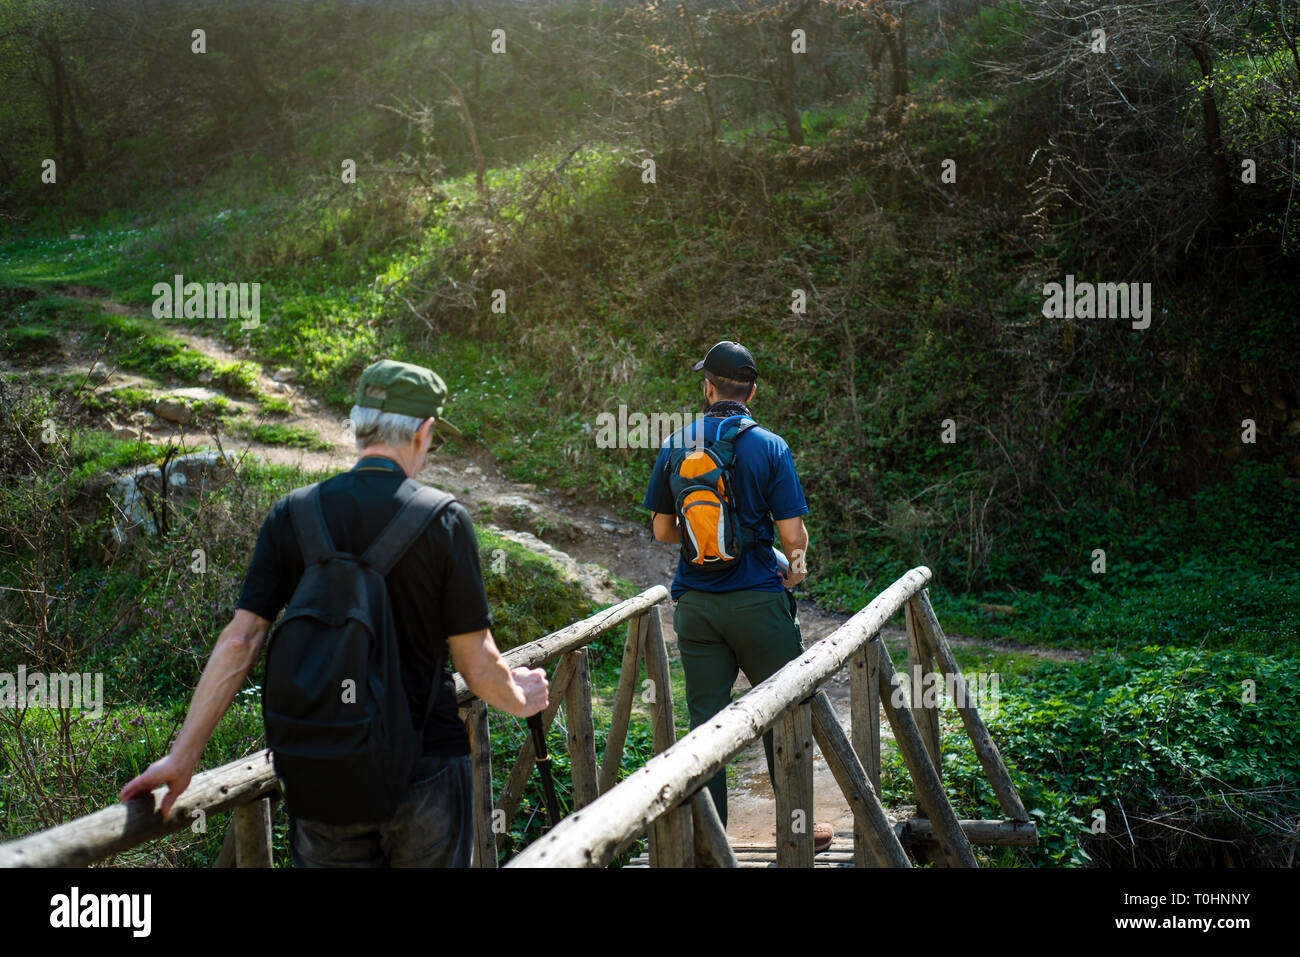 Hikers crossing the wooden bridge over small river Stock Photo